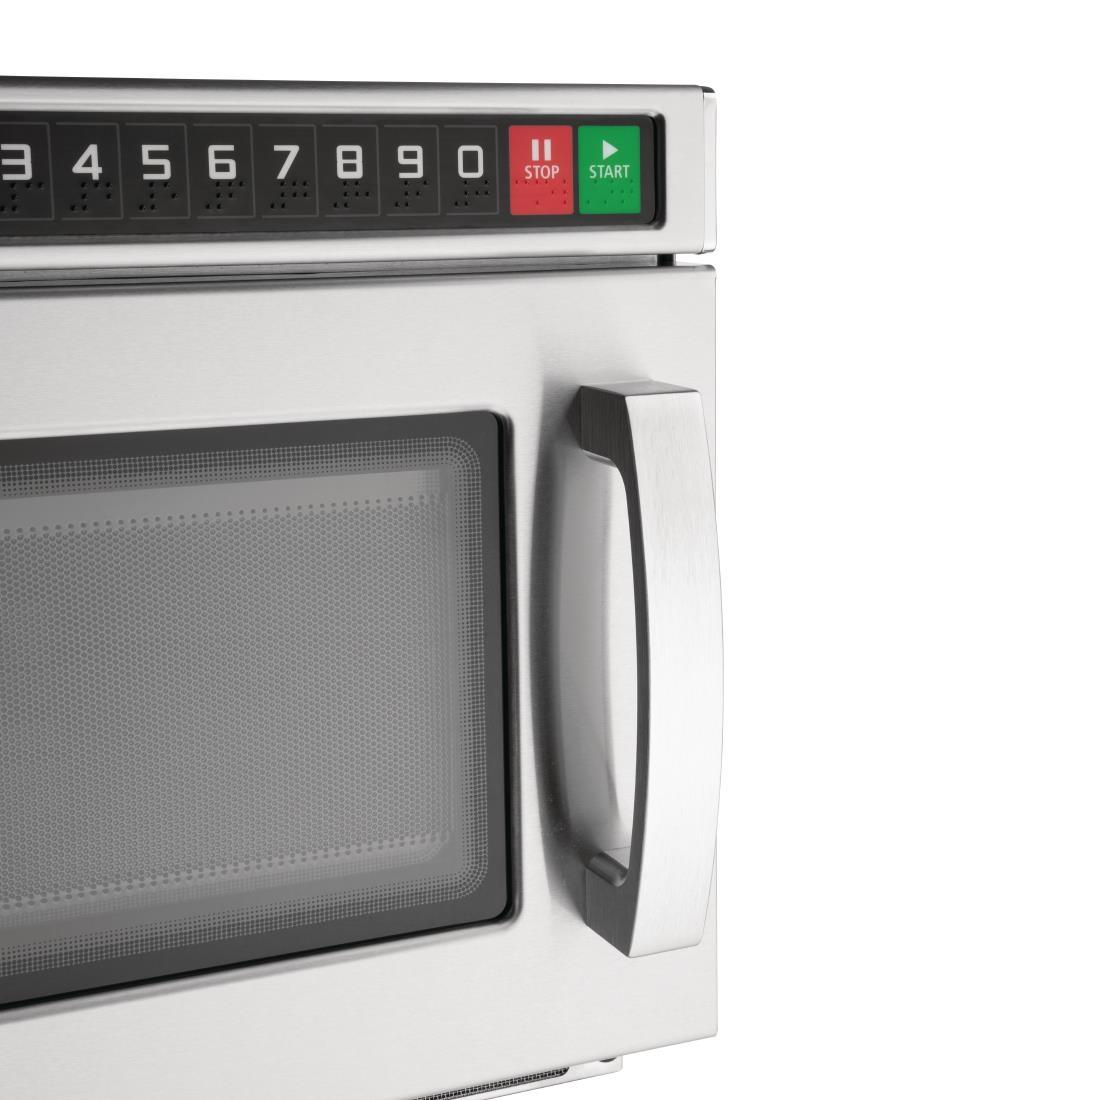 Buffalo Programmable Compact Microwave Oven 17ltr 1800W - FB865  - 3